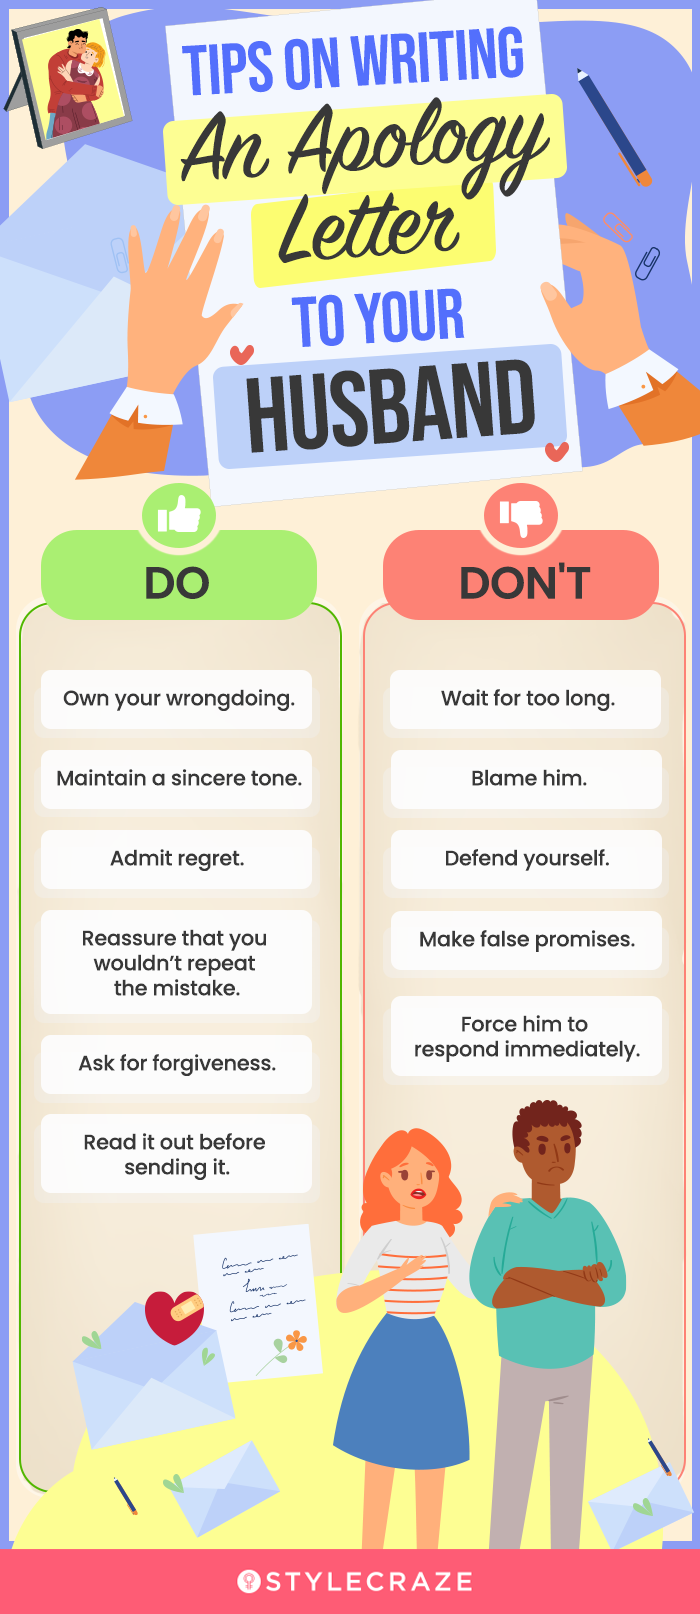 tips on writing an apology letter to your husband [infographic]